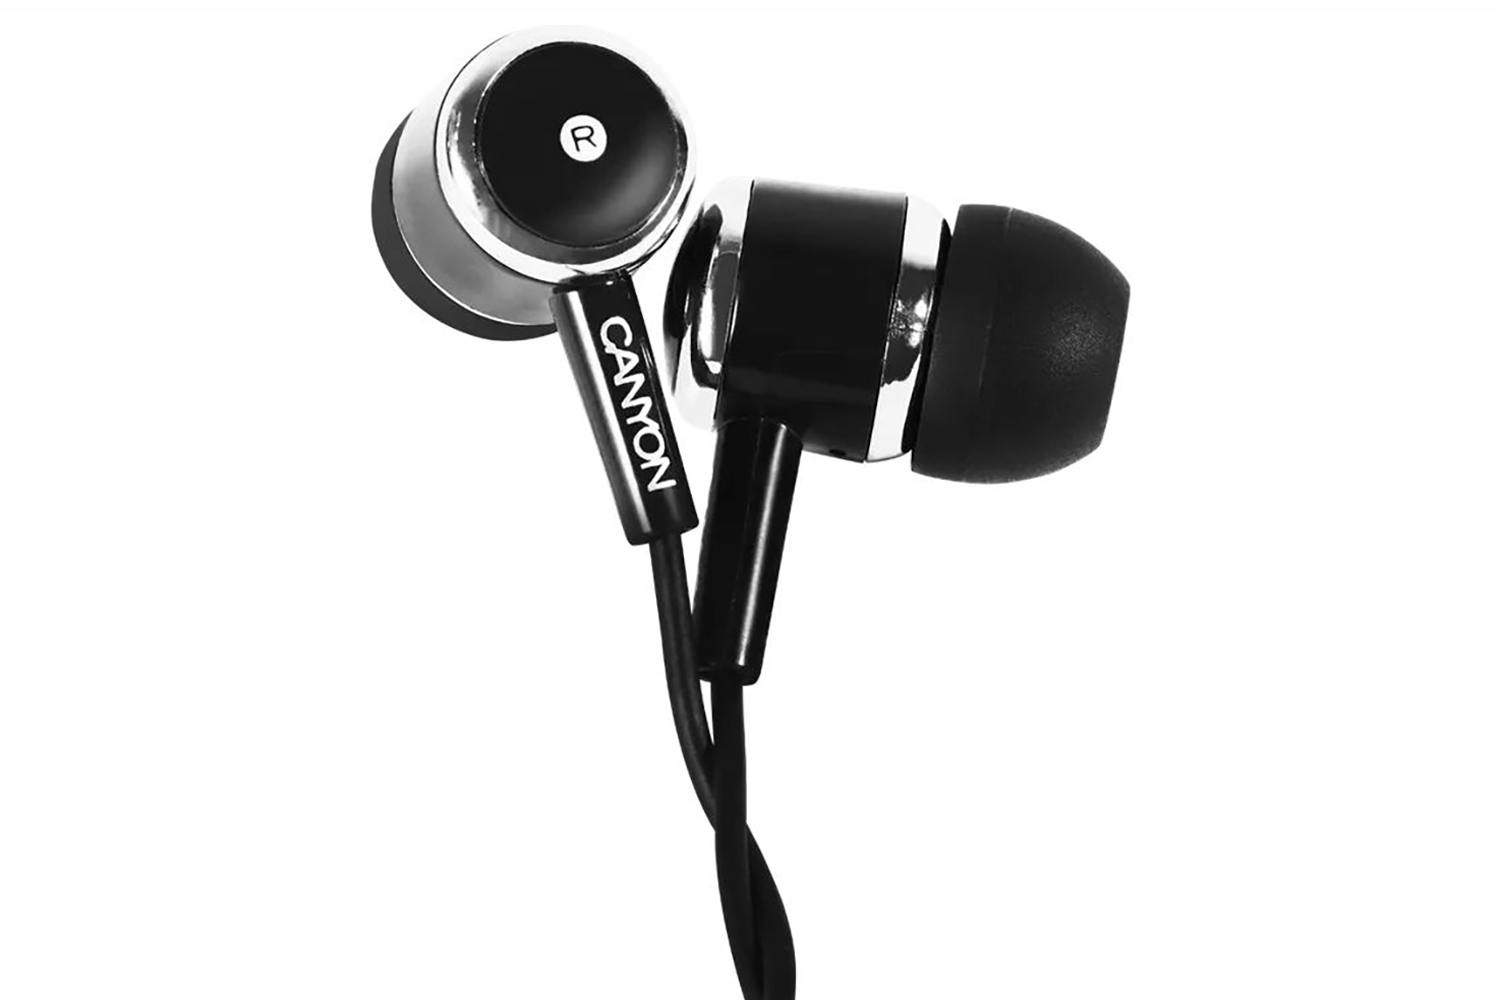 Canyon EPM-01 In-Ear Stereo Headphones with Mic | Black